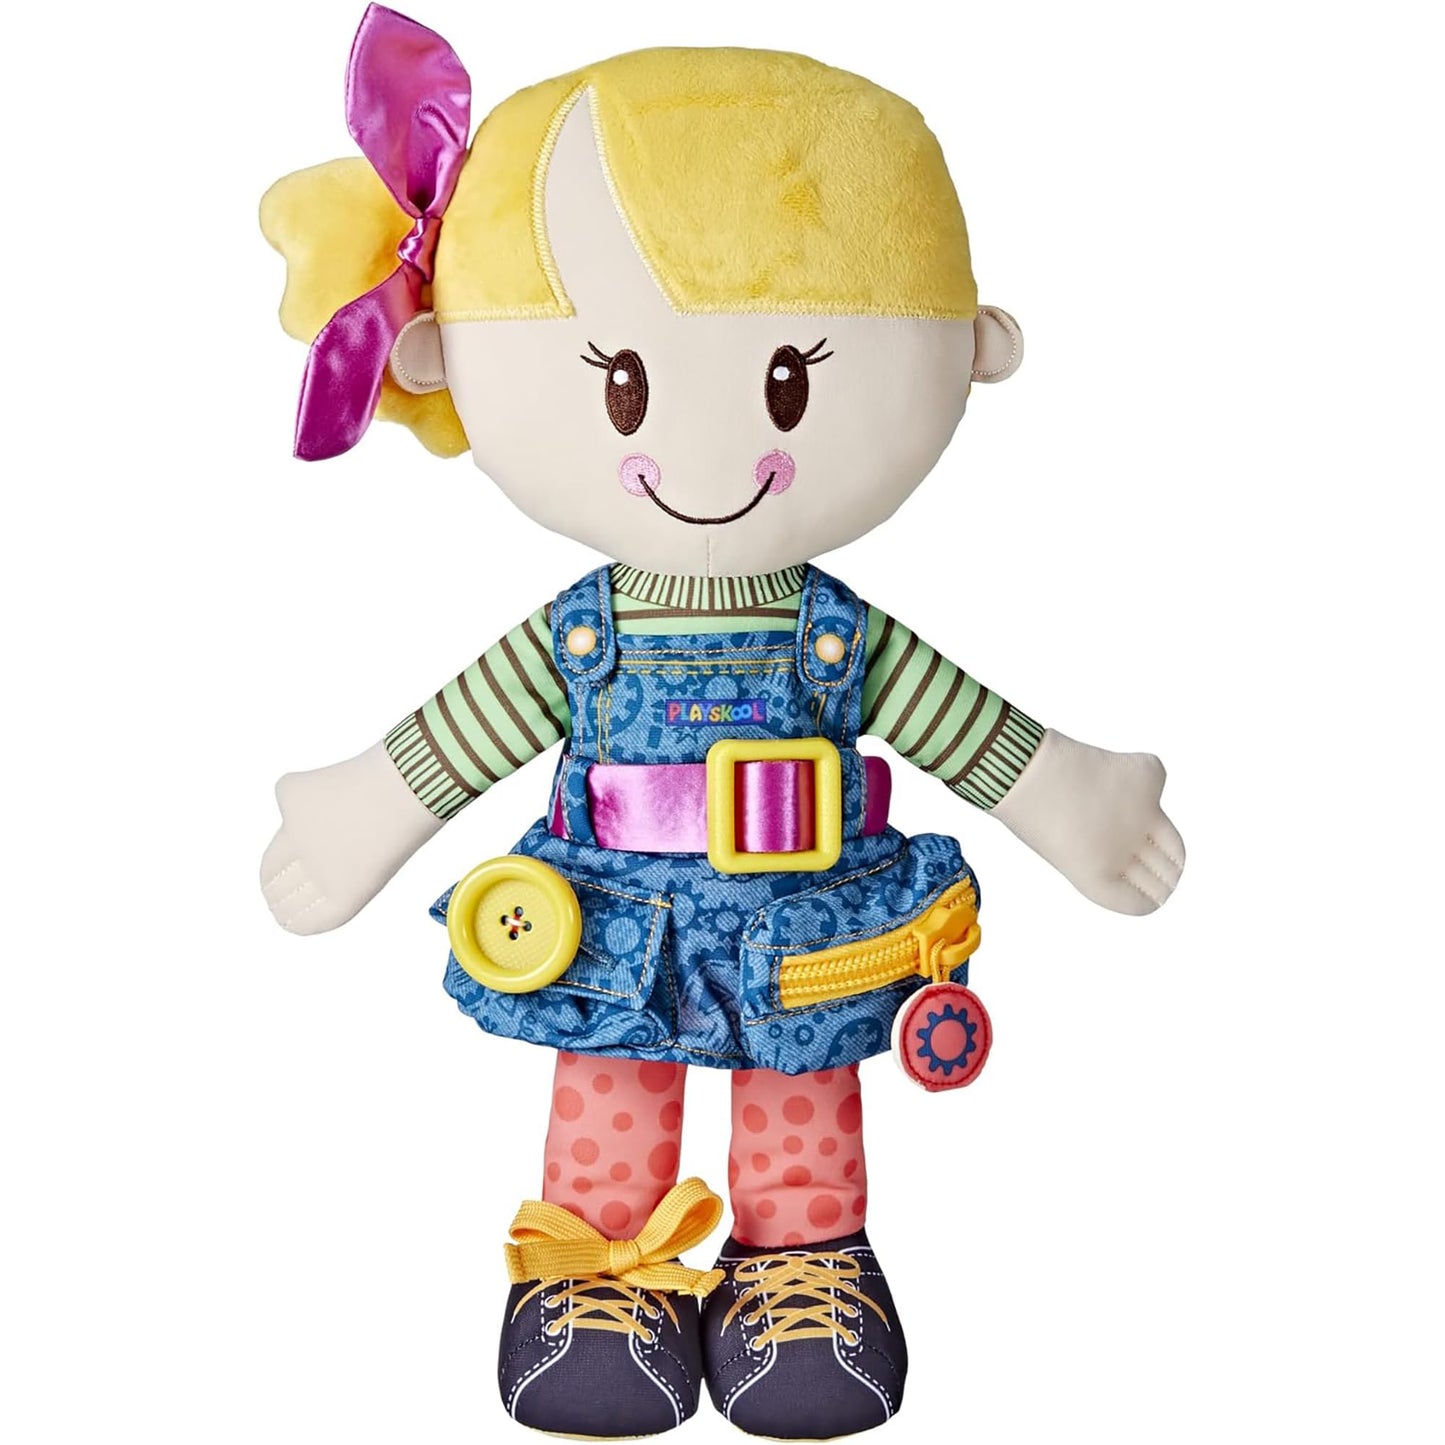 Playskool Dressy Kids Doll with Blonde Hair and Bow, Activity Plush Toy with Zipper, Shoelace, Button, for Ages 2 and Up (Amazon Exclusive)